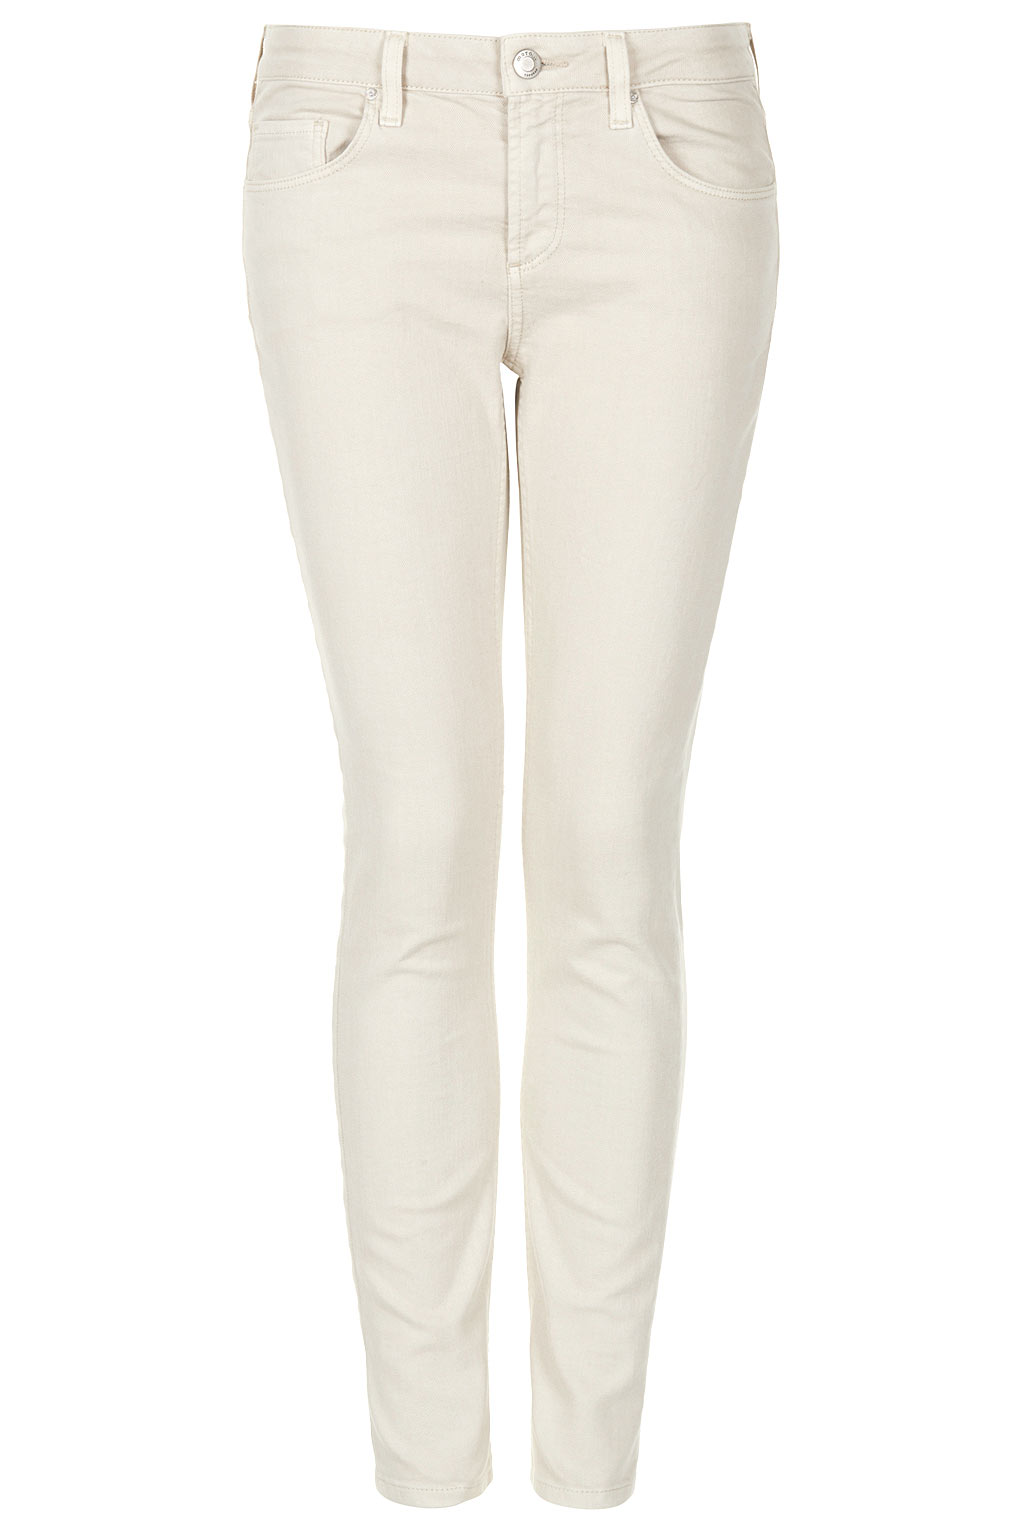 Lyst - Topshop Cream Baxter Skinny Jeans in Natural